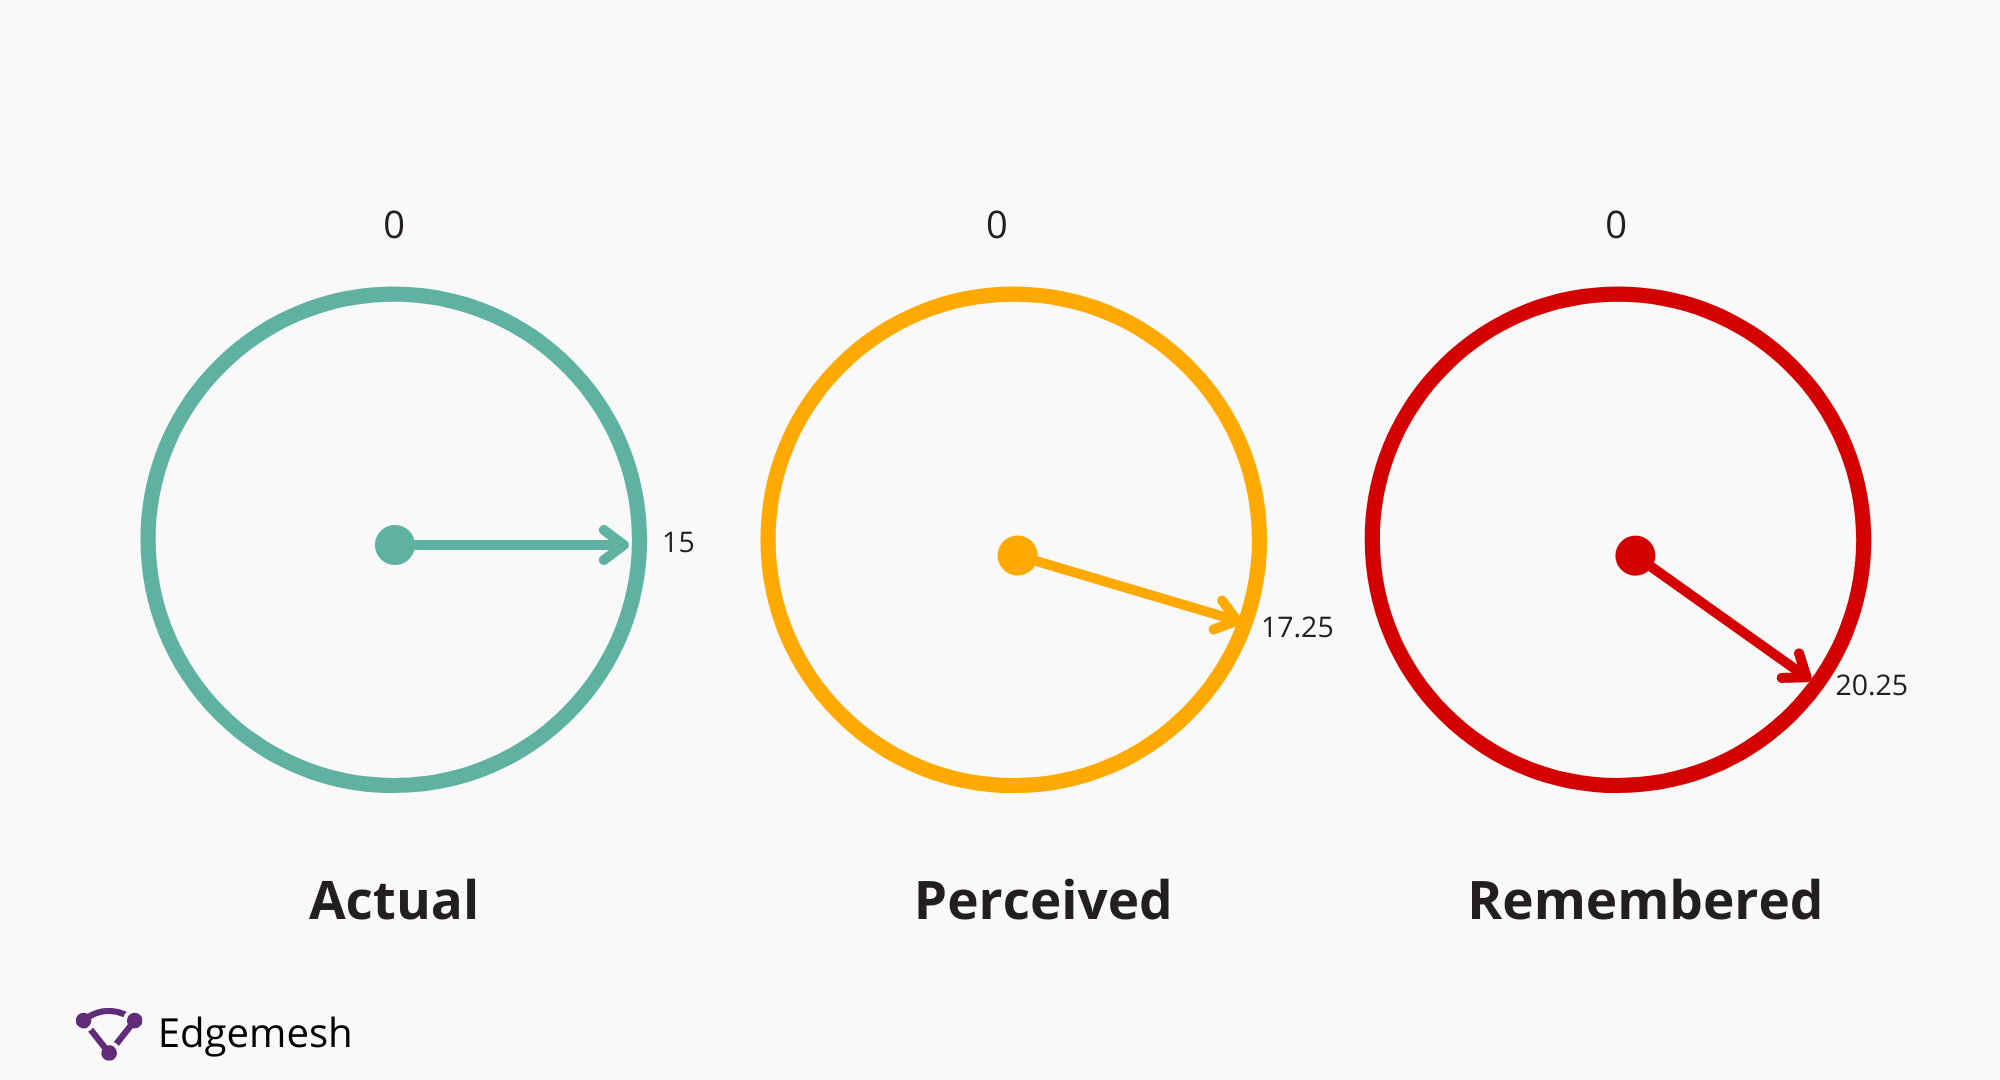 Perceived time based on user experience